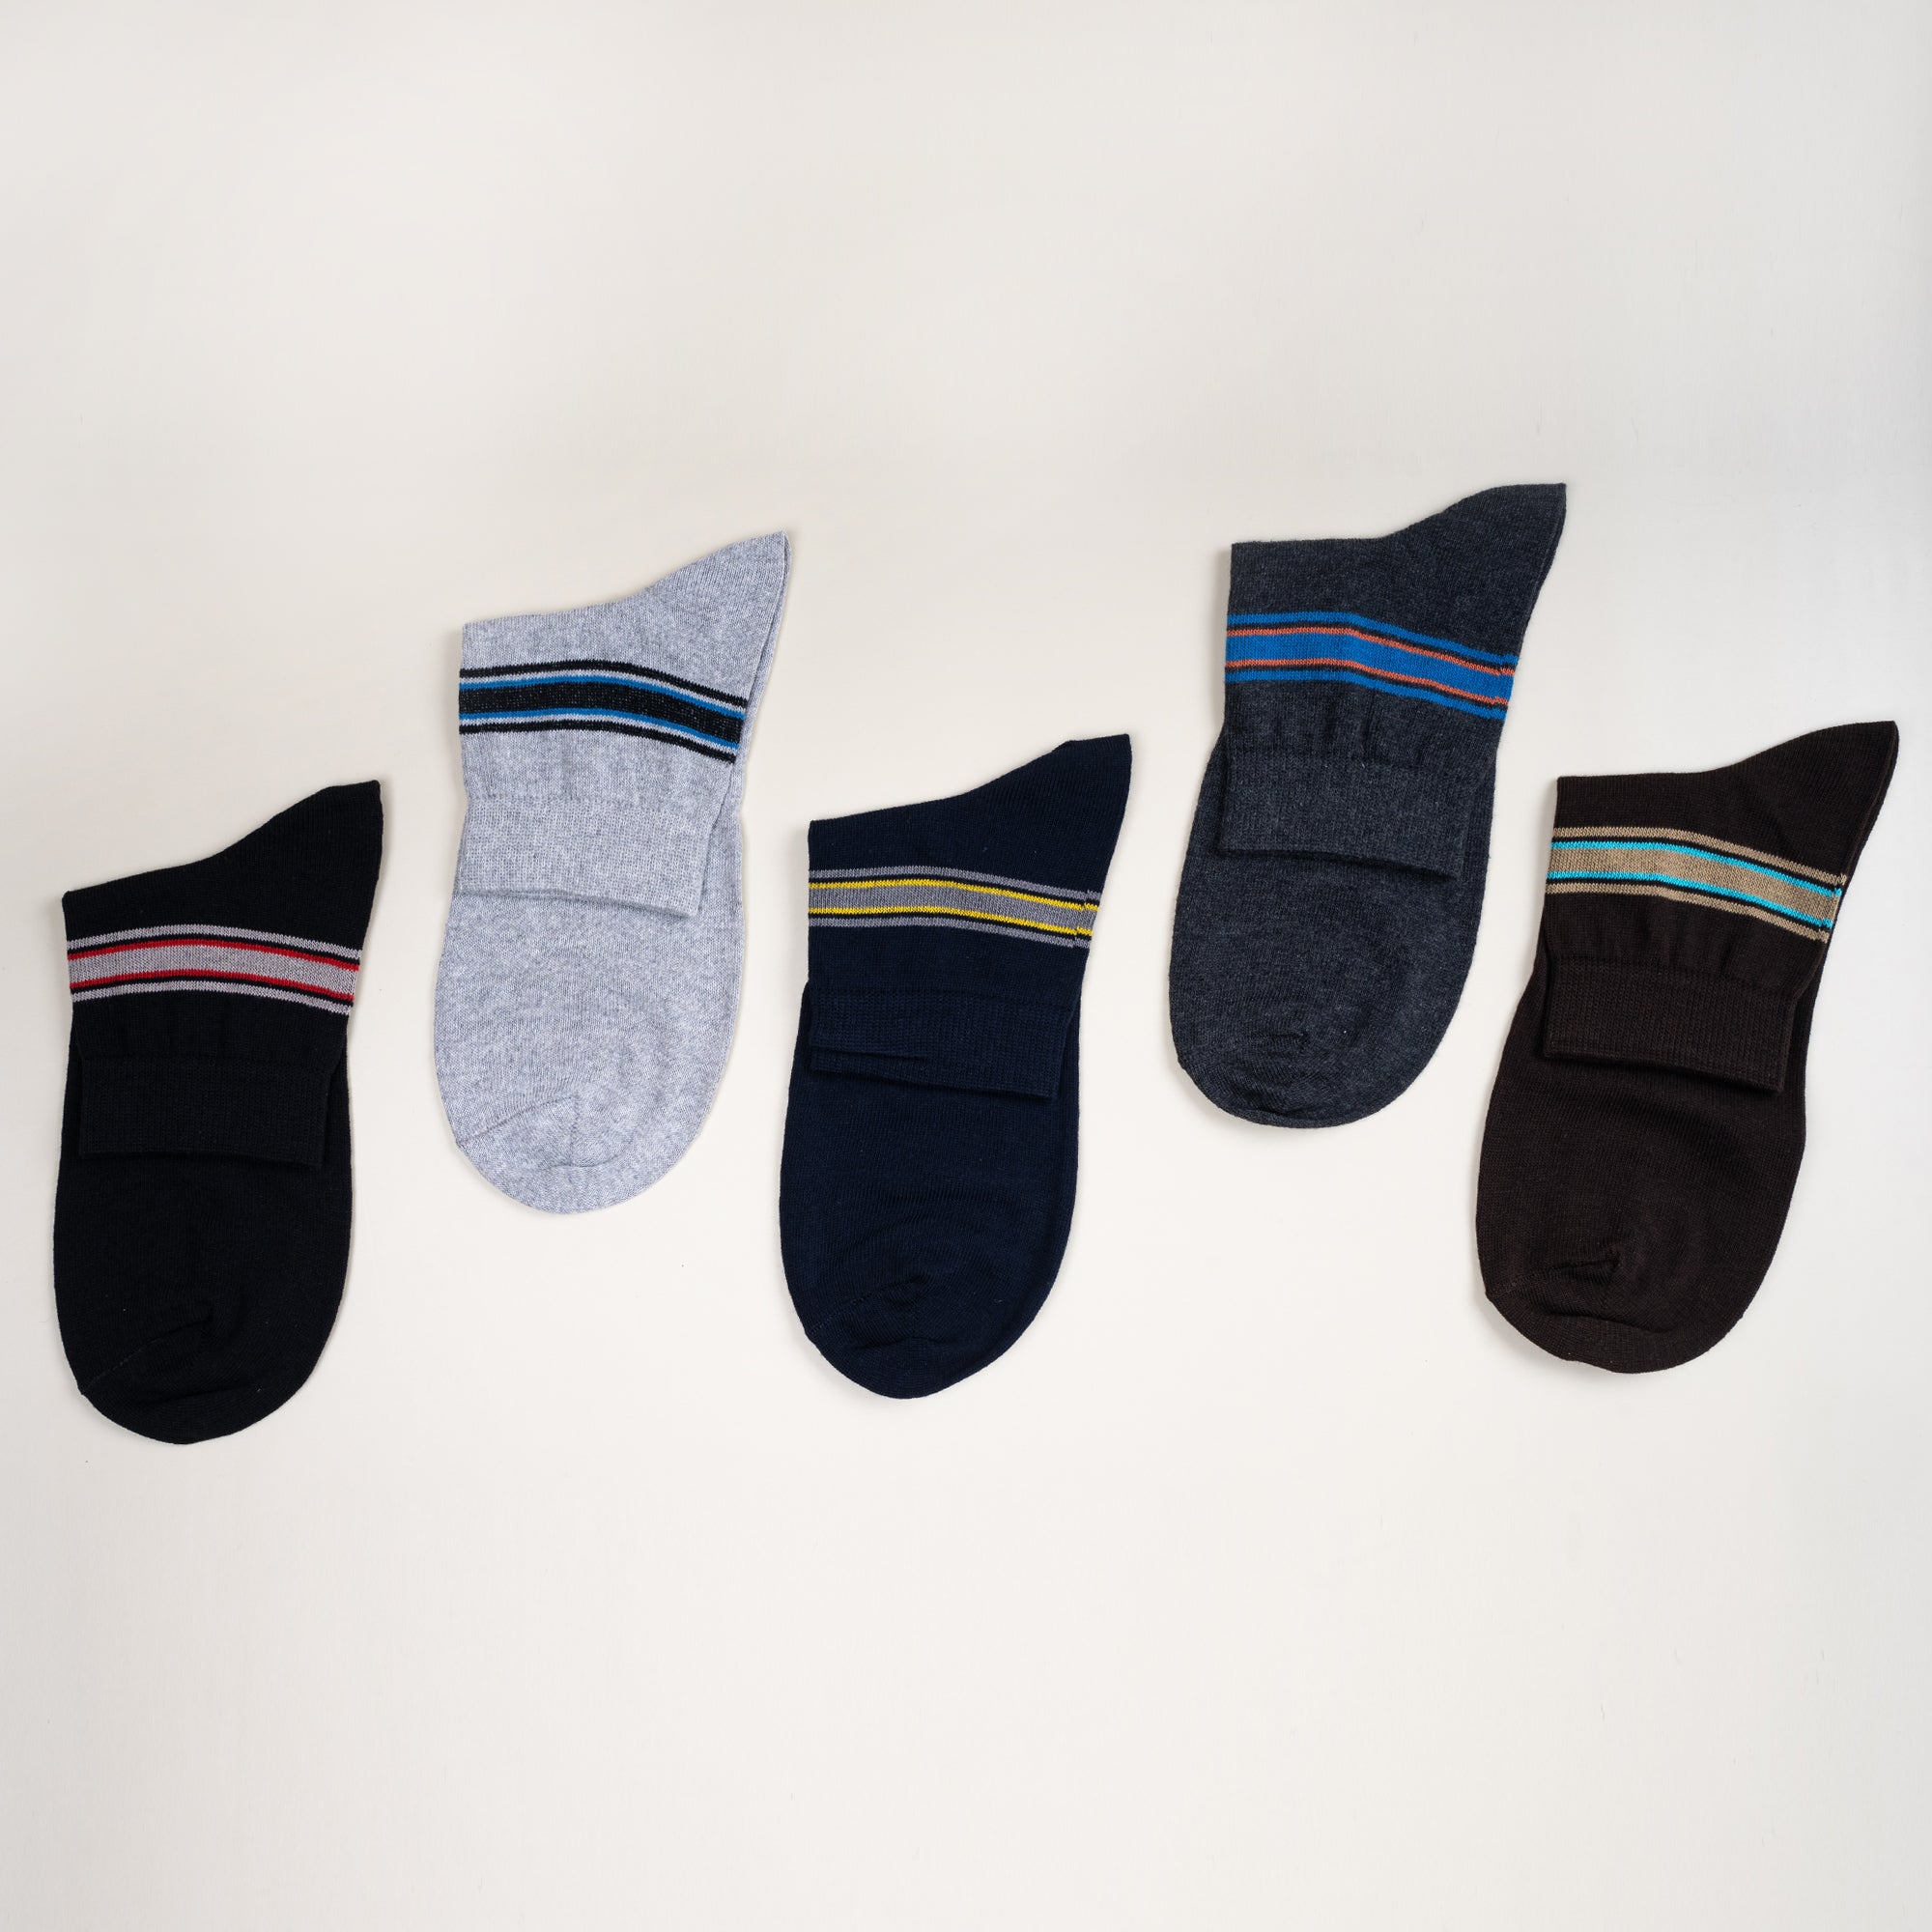 Young Wings Men's Multi Colour Cotton Fabric Stripe Ankle Length Socks - Pack of 5, Style no. M1-2141 N